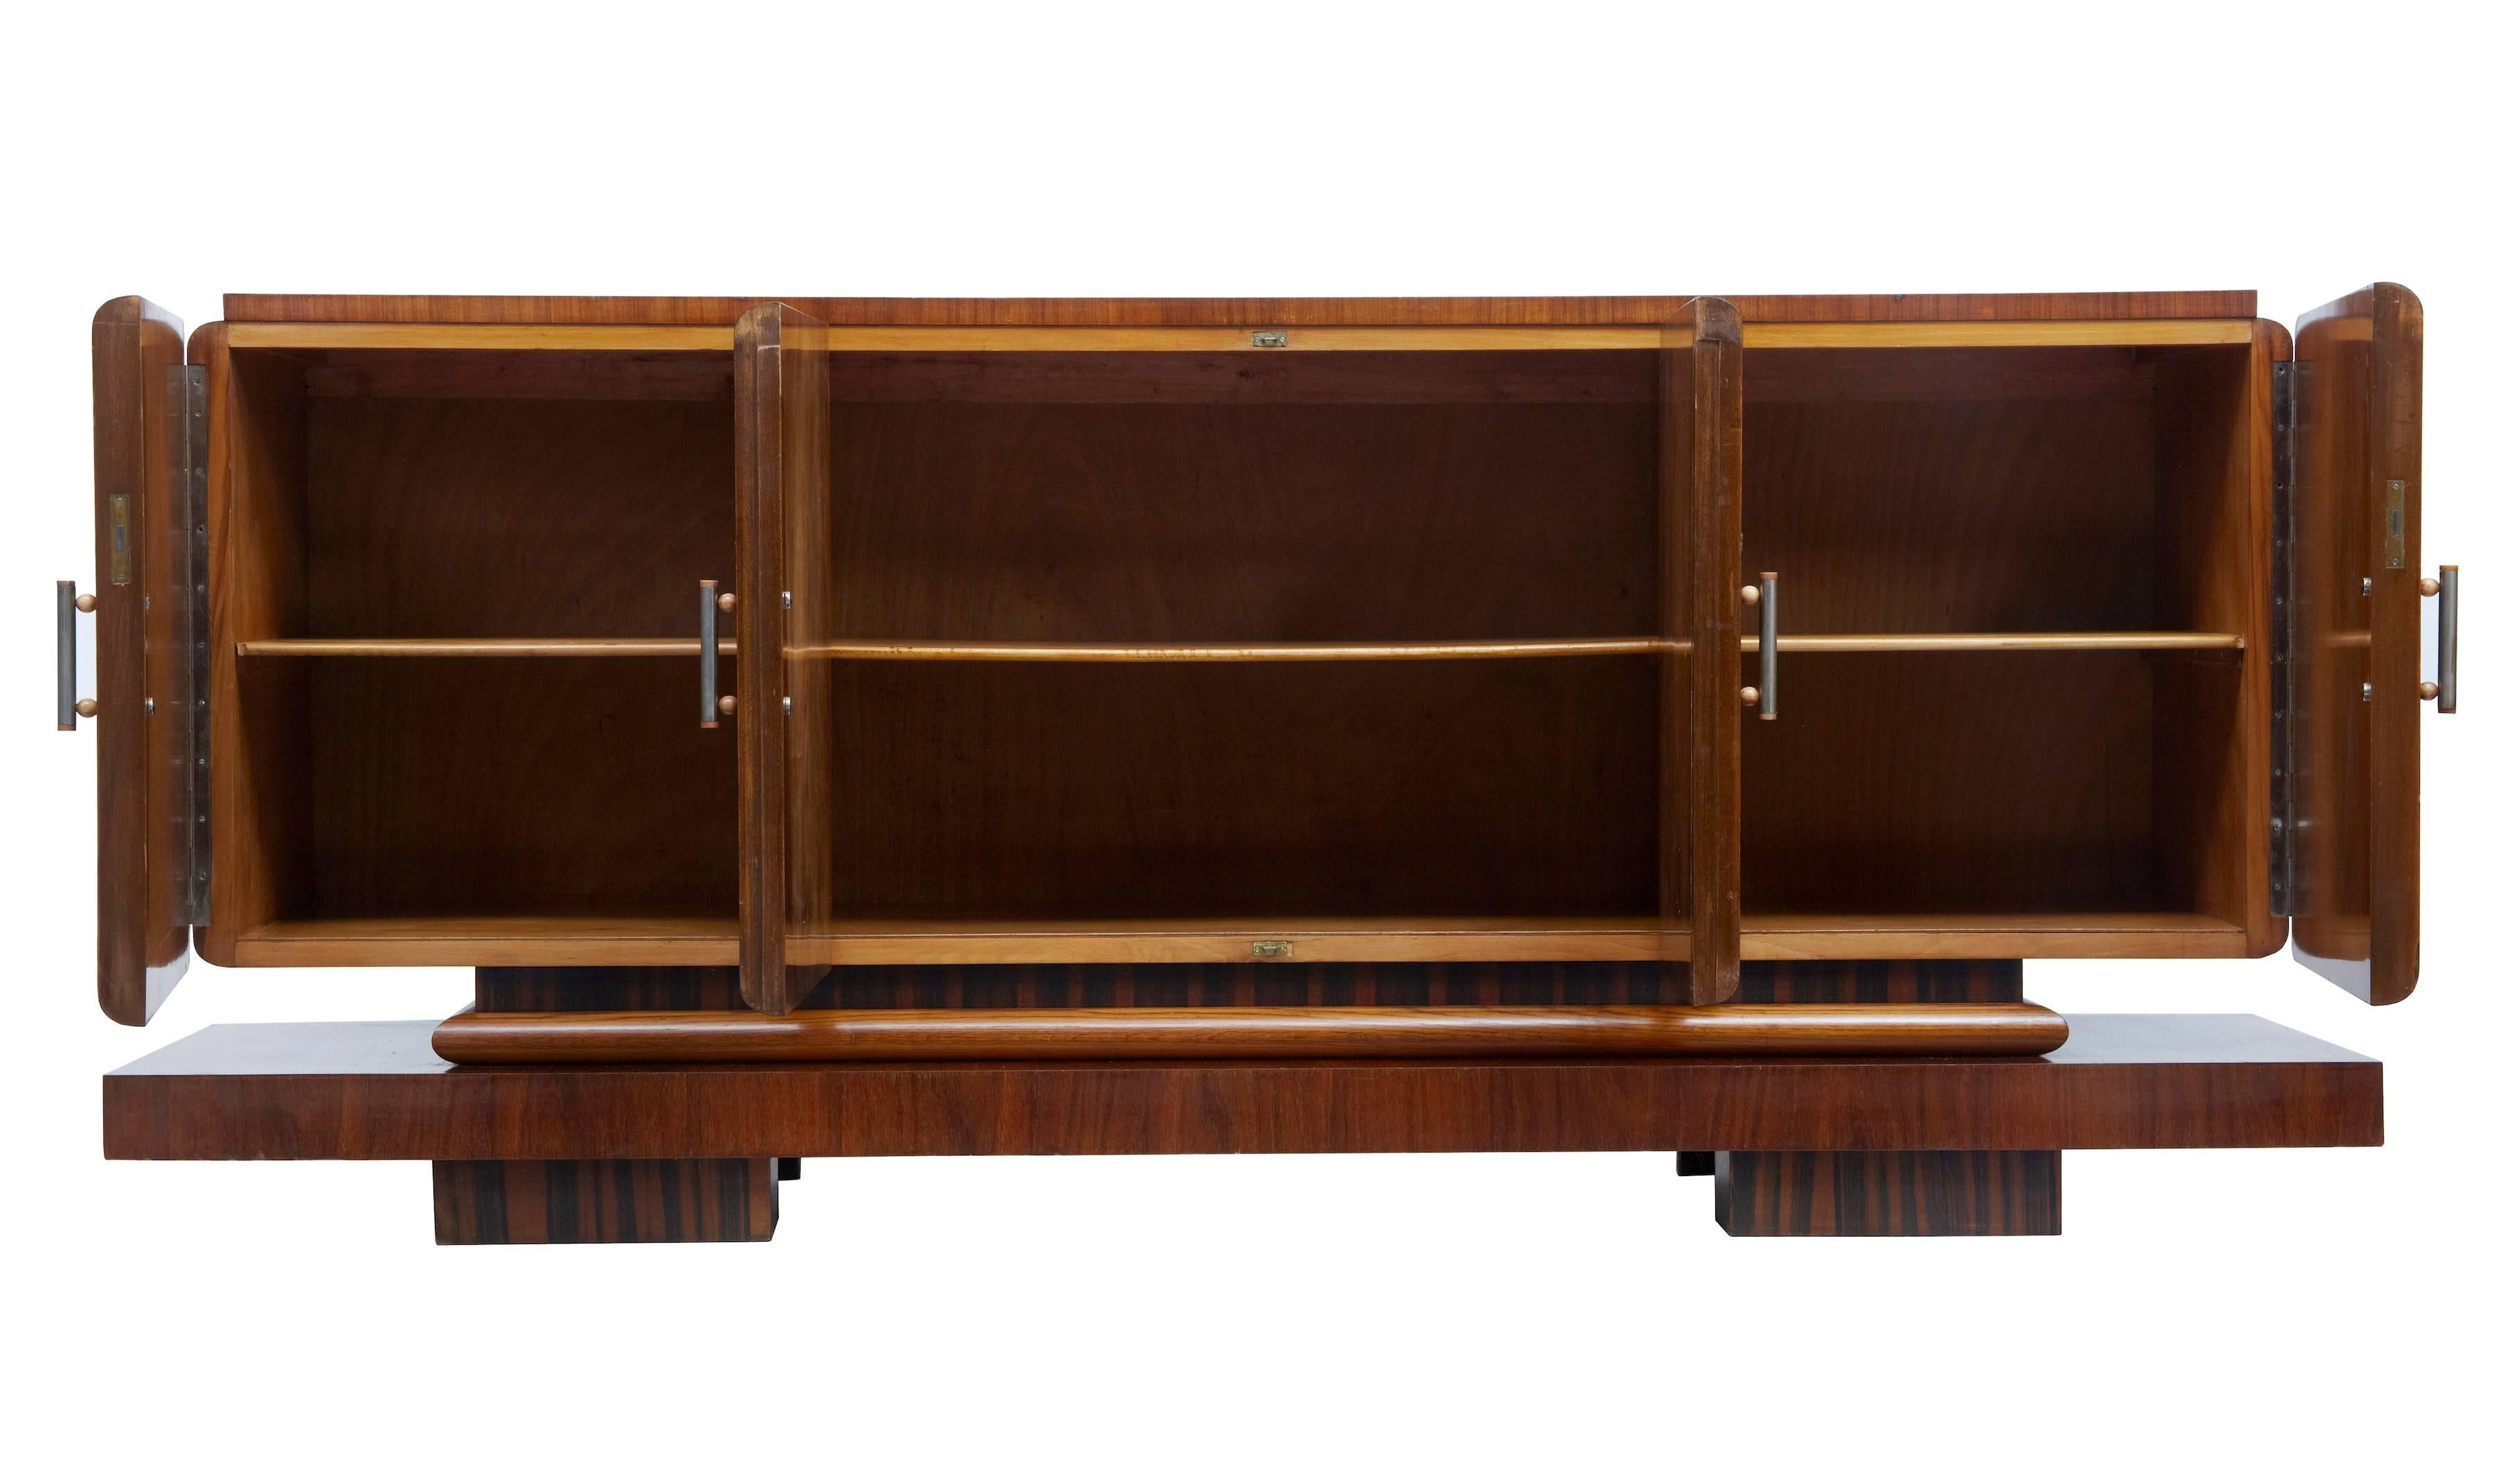 Fantastic Art Deco period sideboard of large proportions, circa 1920.
Four doors with matched walnut veneers which open to a single shelf.
Standing on a kingwood veneered plinth base.
Good rich color.
Ceramic and brushed steel handles.
Some